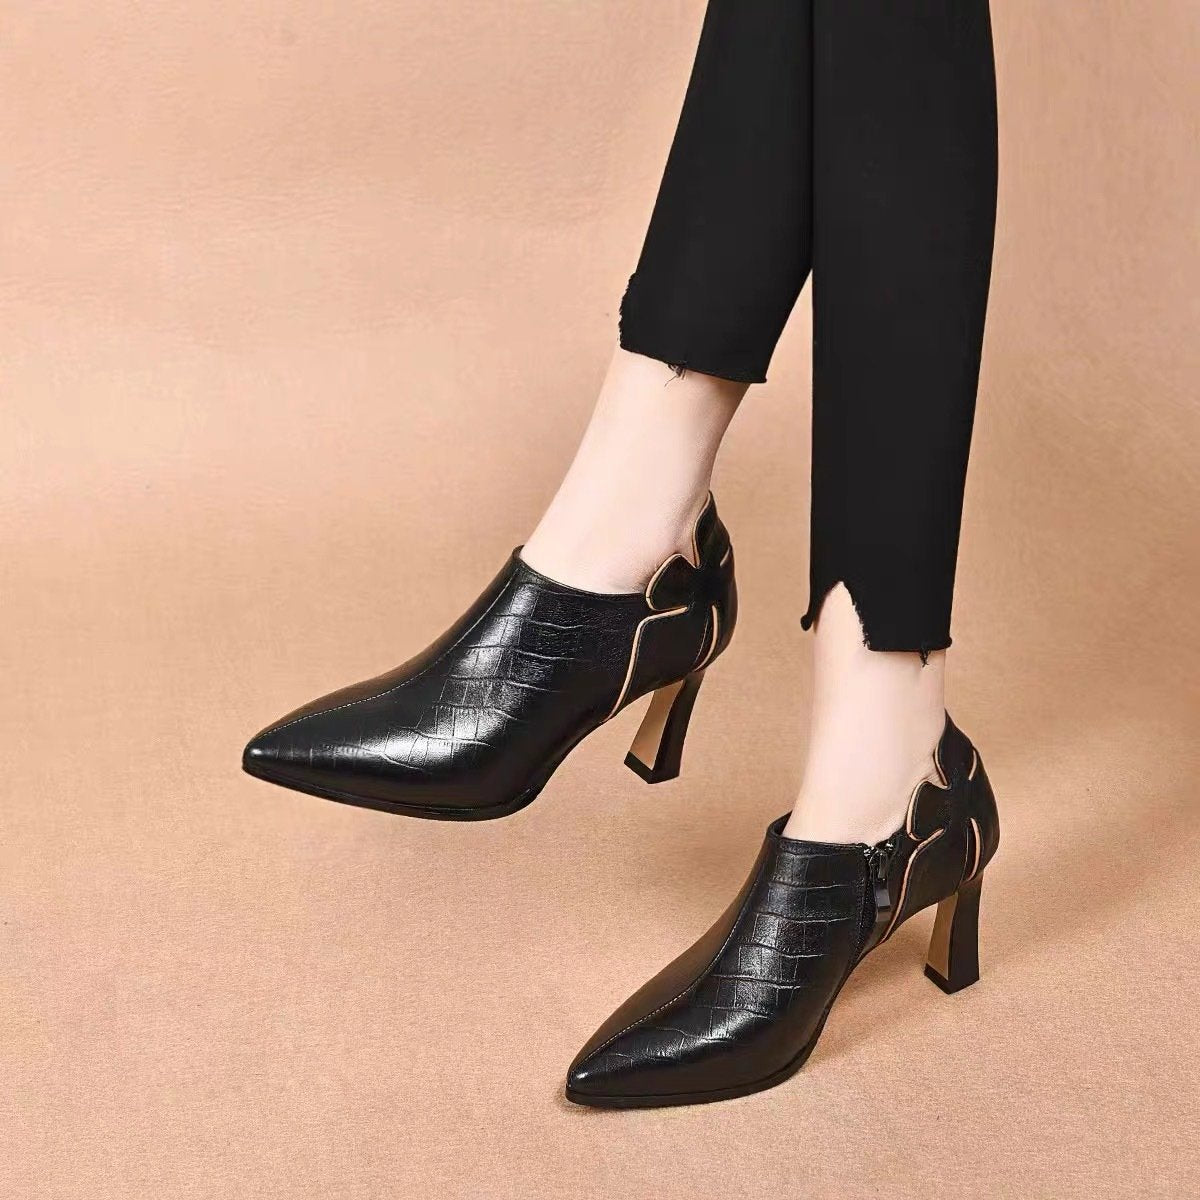 2 inch heel leather shoes